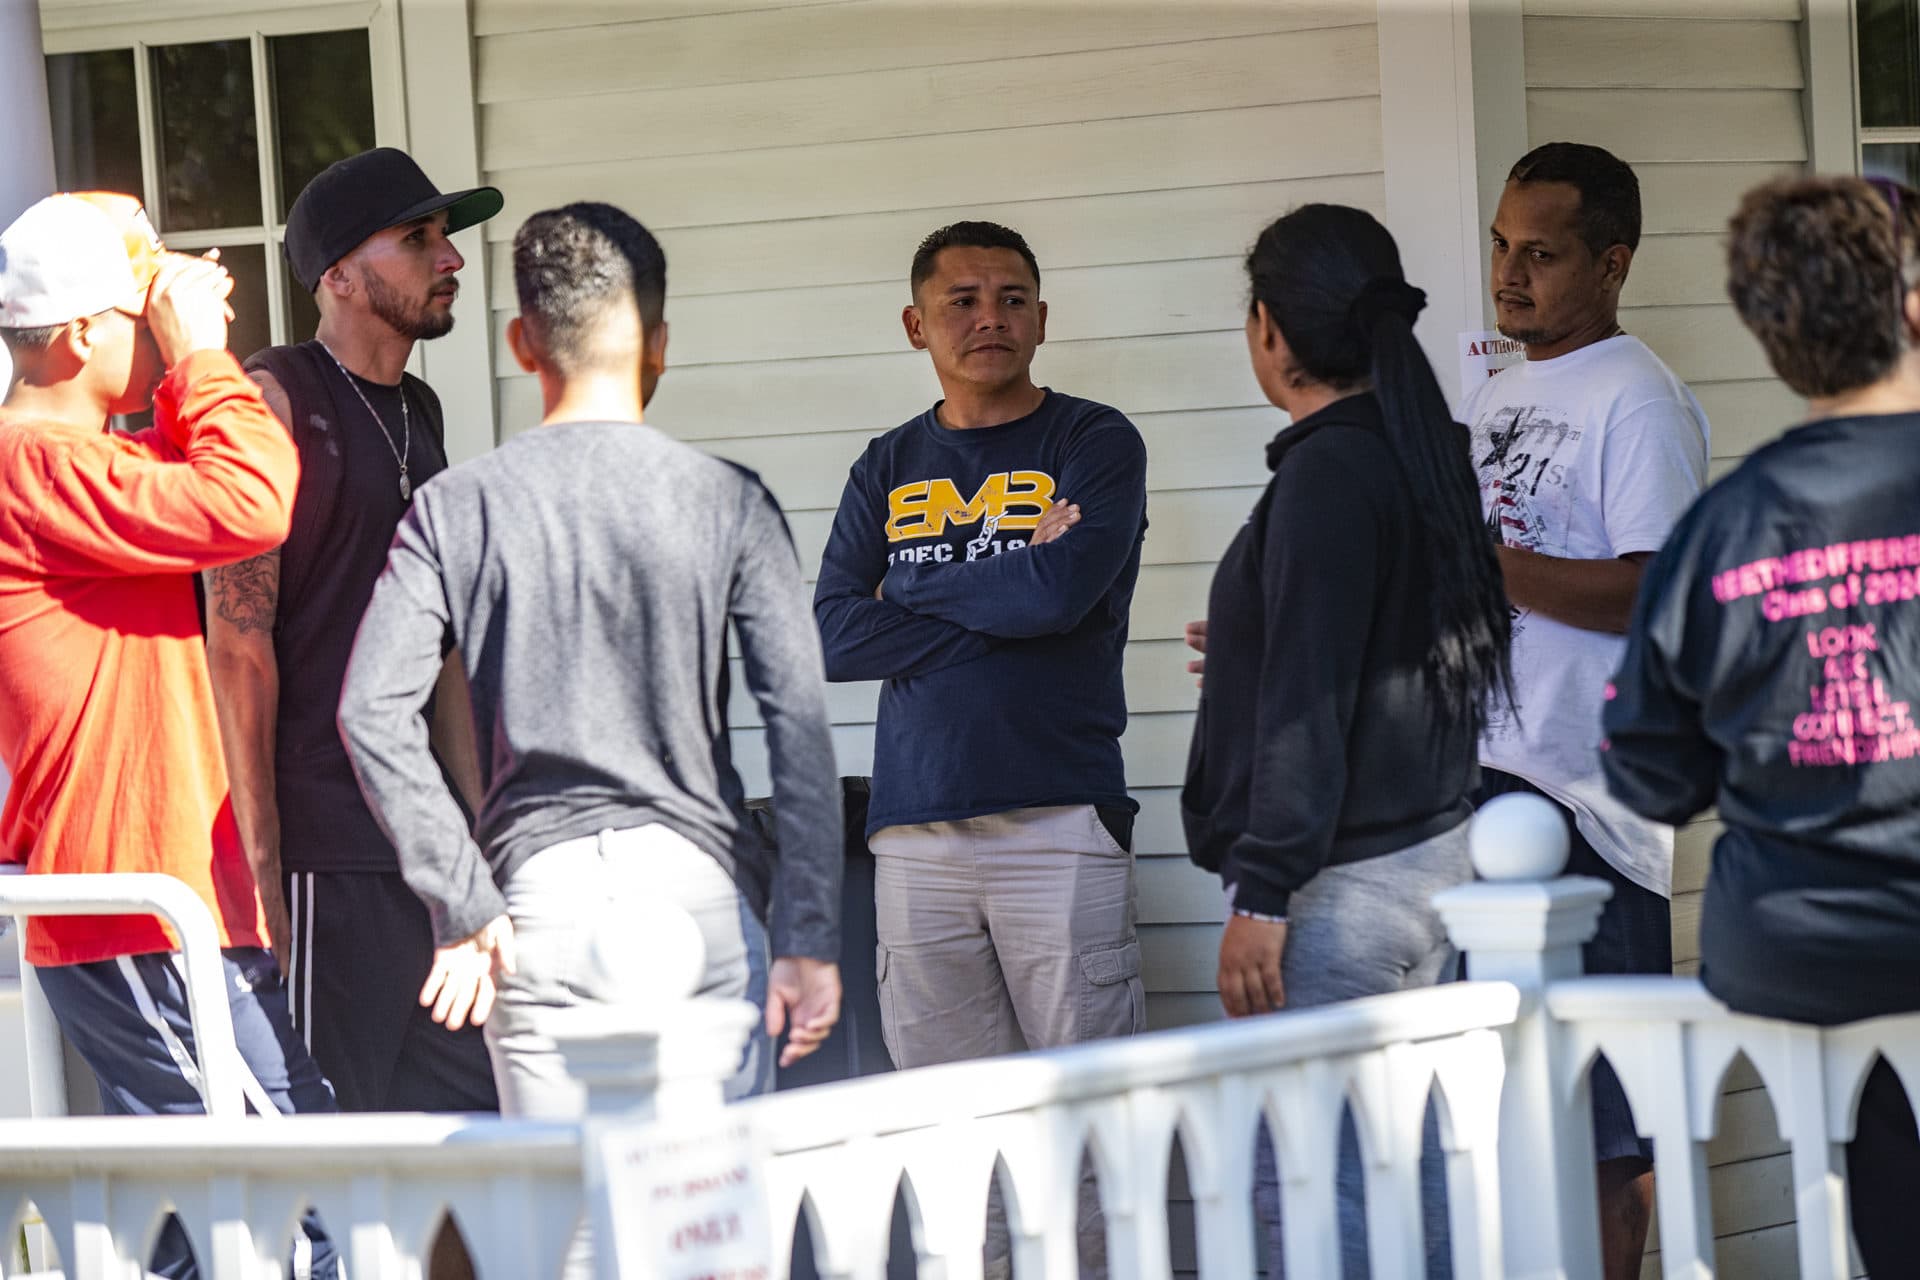 Migrants from Venezuela, sent to Martha’s Vineyard by way of Texas and Florida, stand and talk to one another at St. Andrew’s Parish House in Edgartown. (Jesse Costa/WBUR)